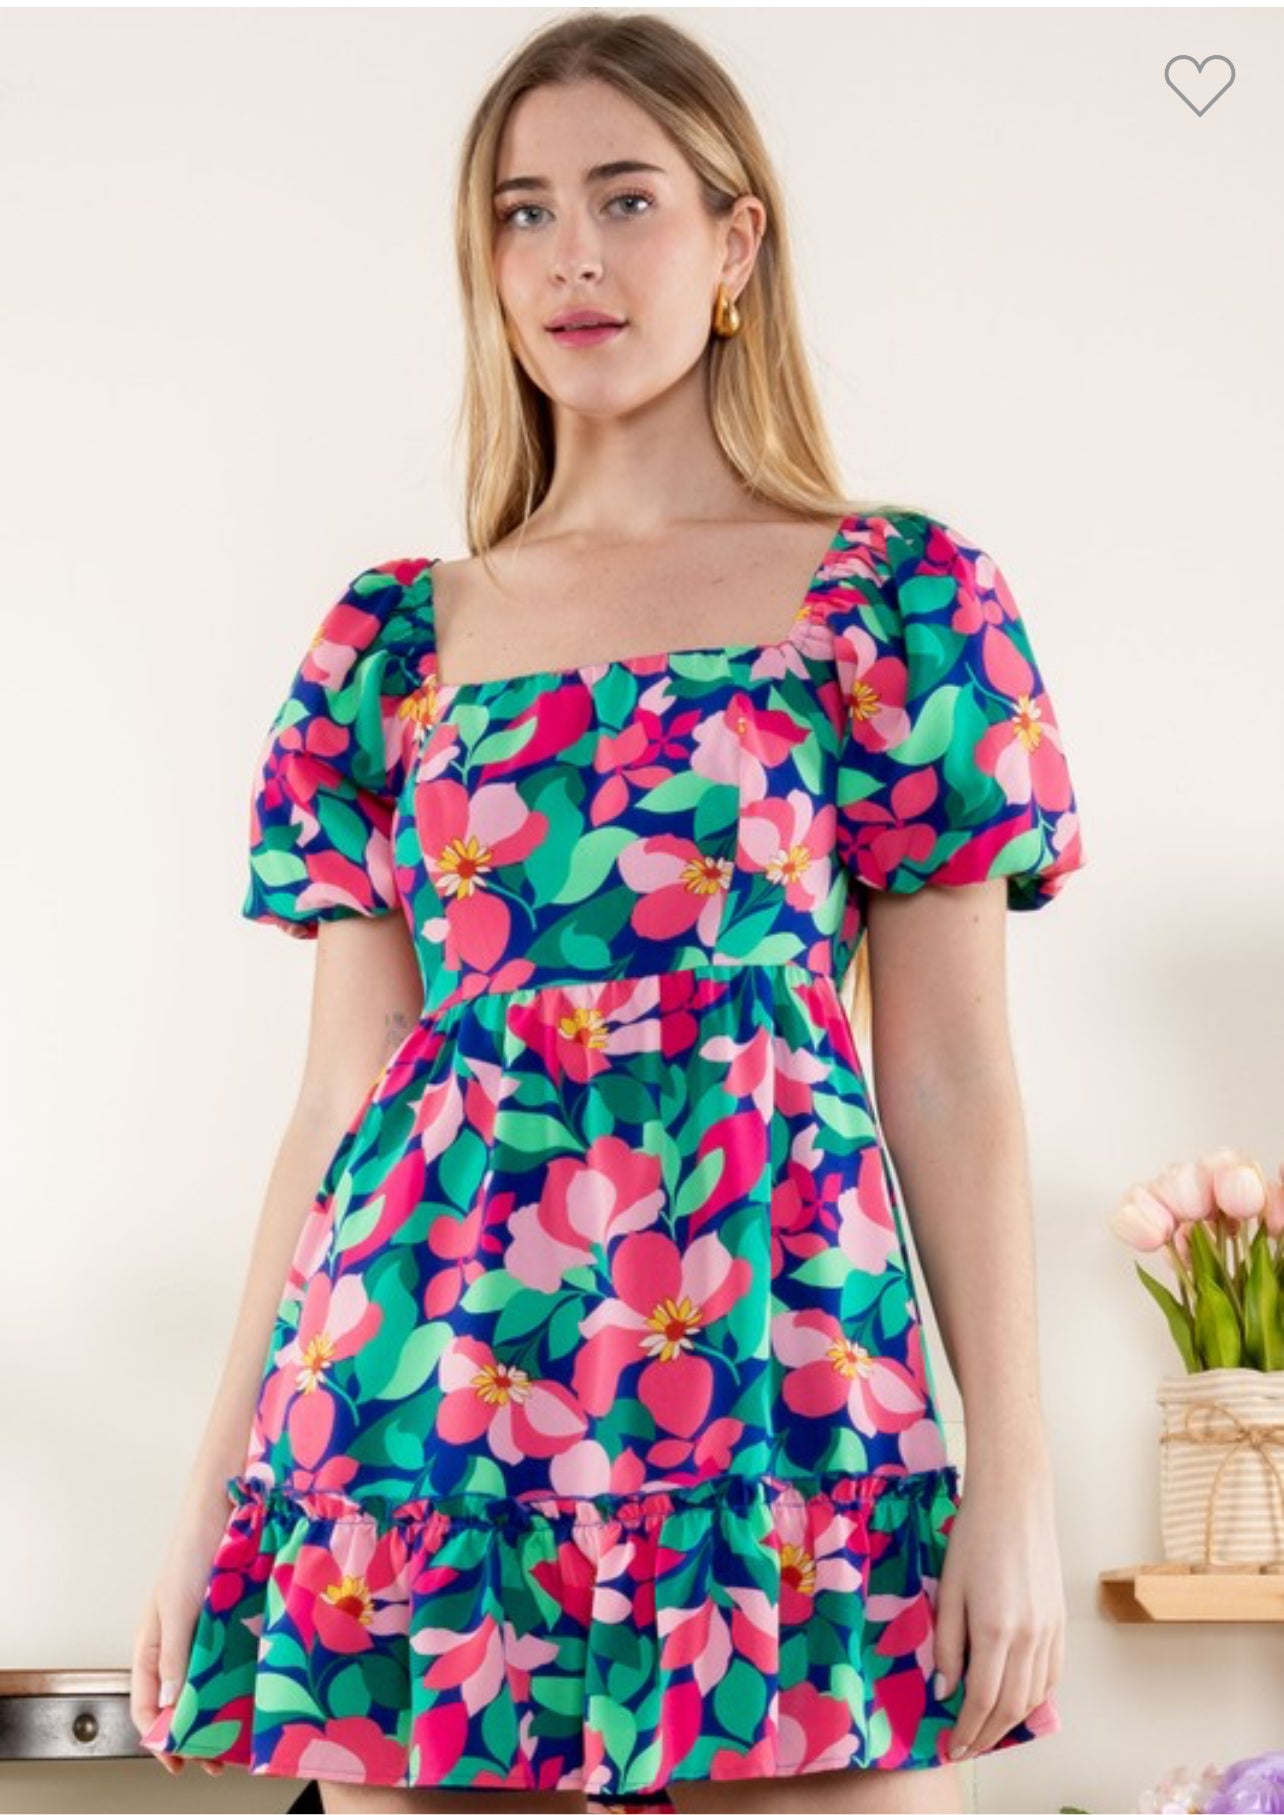 Colored Flowers Baby doll dress